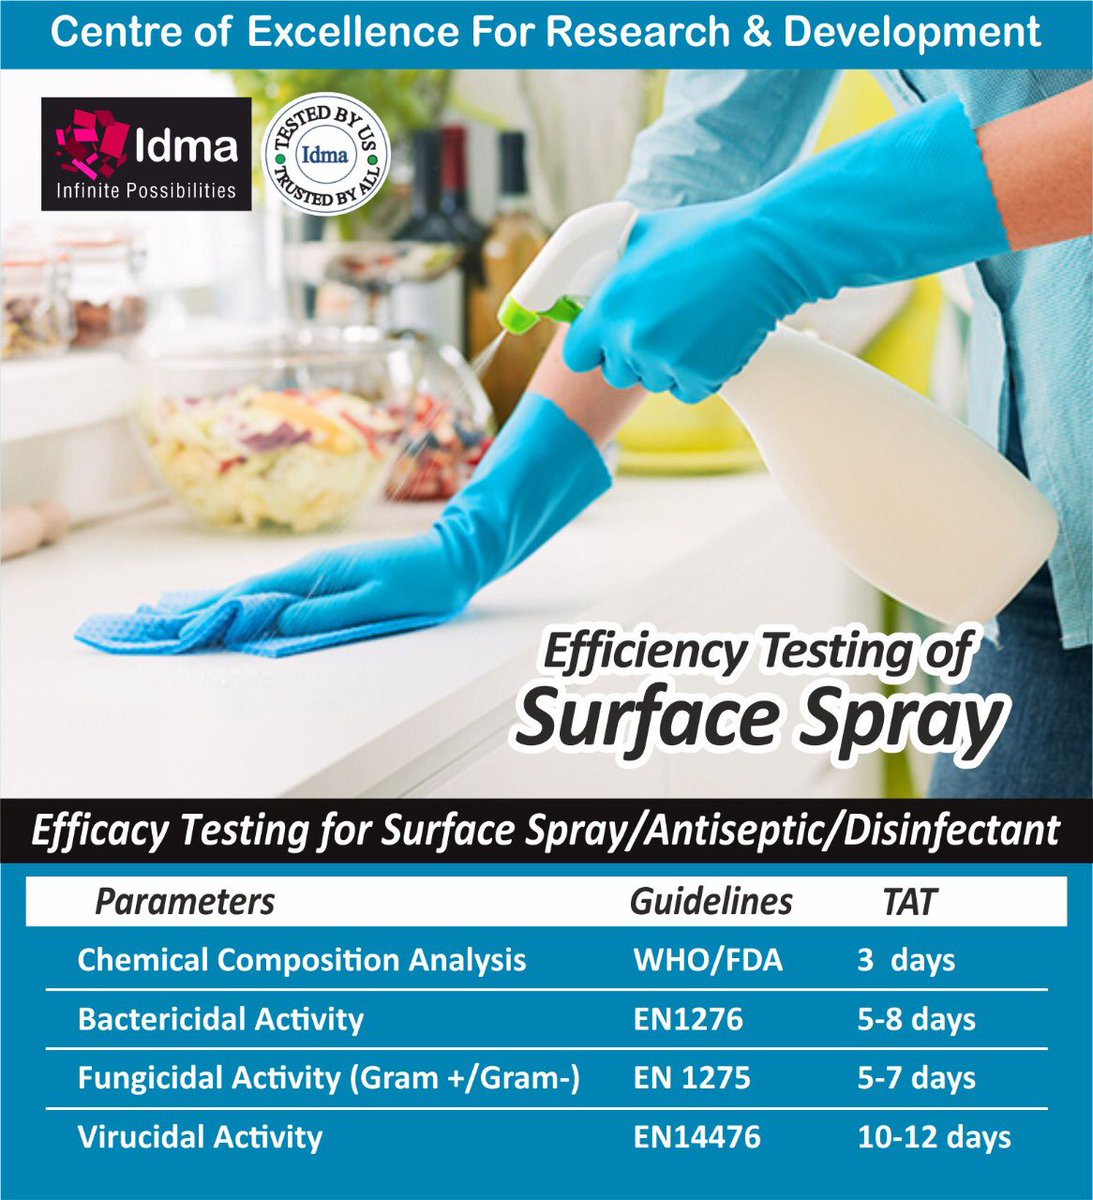 #Idma #Laboratories Ltd undertakes #EfficacyTesting of all types of #Surface #Sanitizers & #Disinfectants at its Centre of Excellence for Testing & Research

#researchanddevelopment #surfacecleaning #surfacesanitizer #germs #bacterias #moulds #viruses #surfacecleaner #goodhygiene